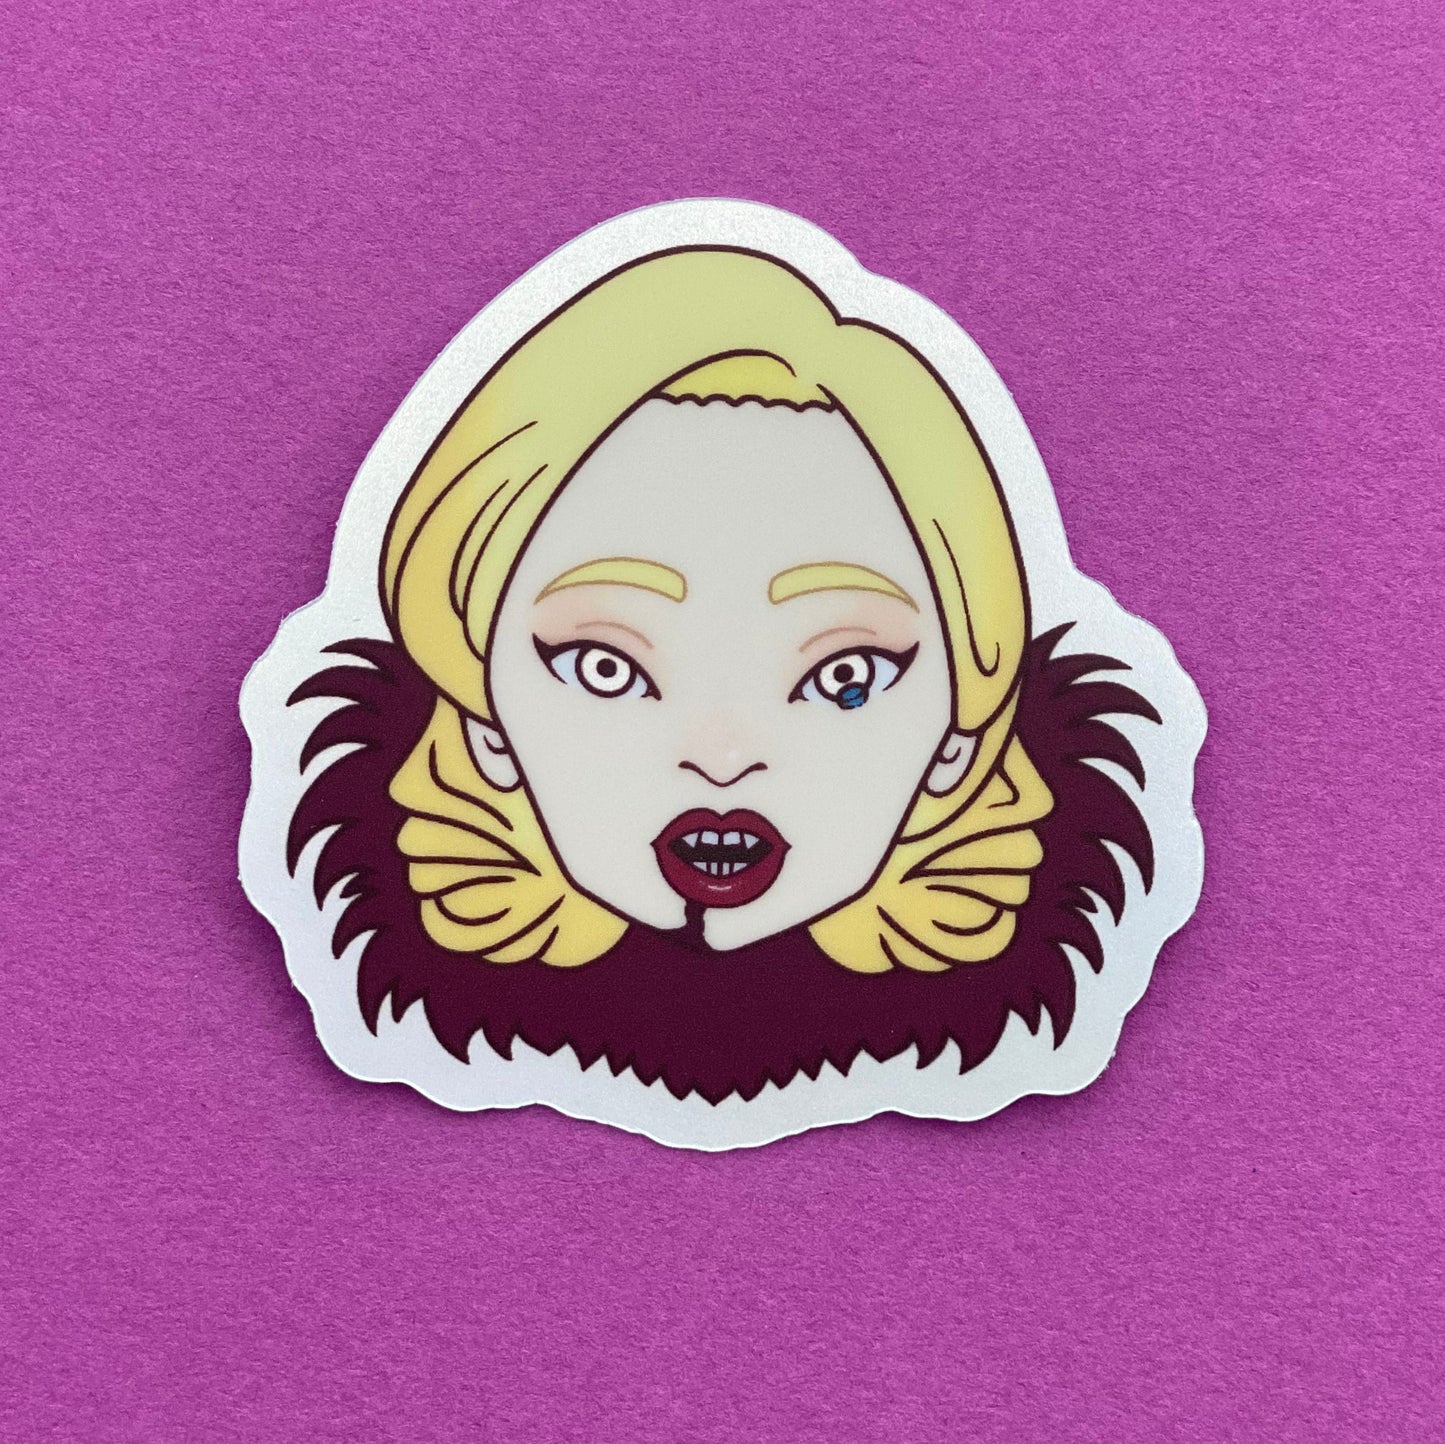 A sticker featuring an illustration of Lady Gaga's head as she appears in American Horror Story. She has a tear in one eye, vampire fangs, red lipstick, and a red fur collar. Her hair is coiffed in a retro 1940's inspired style.